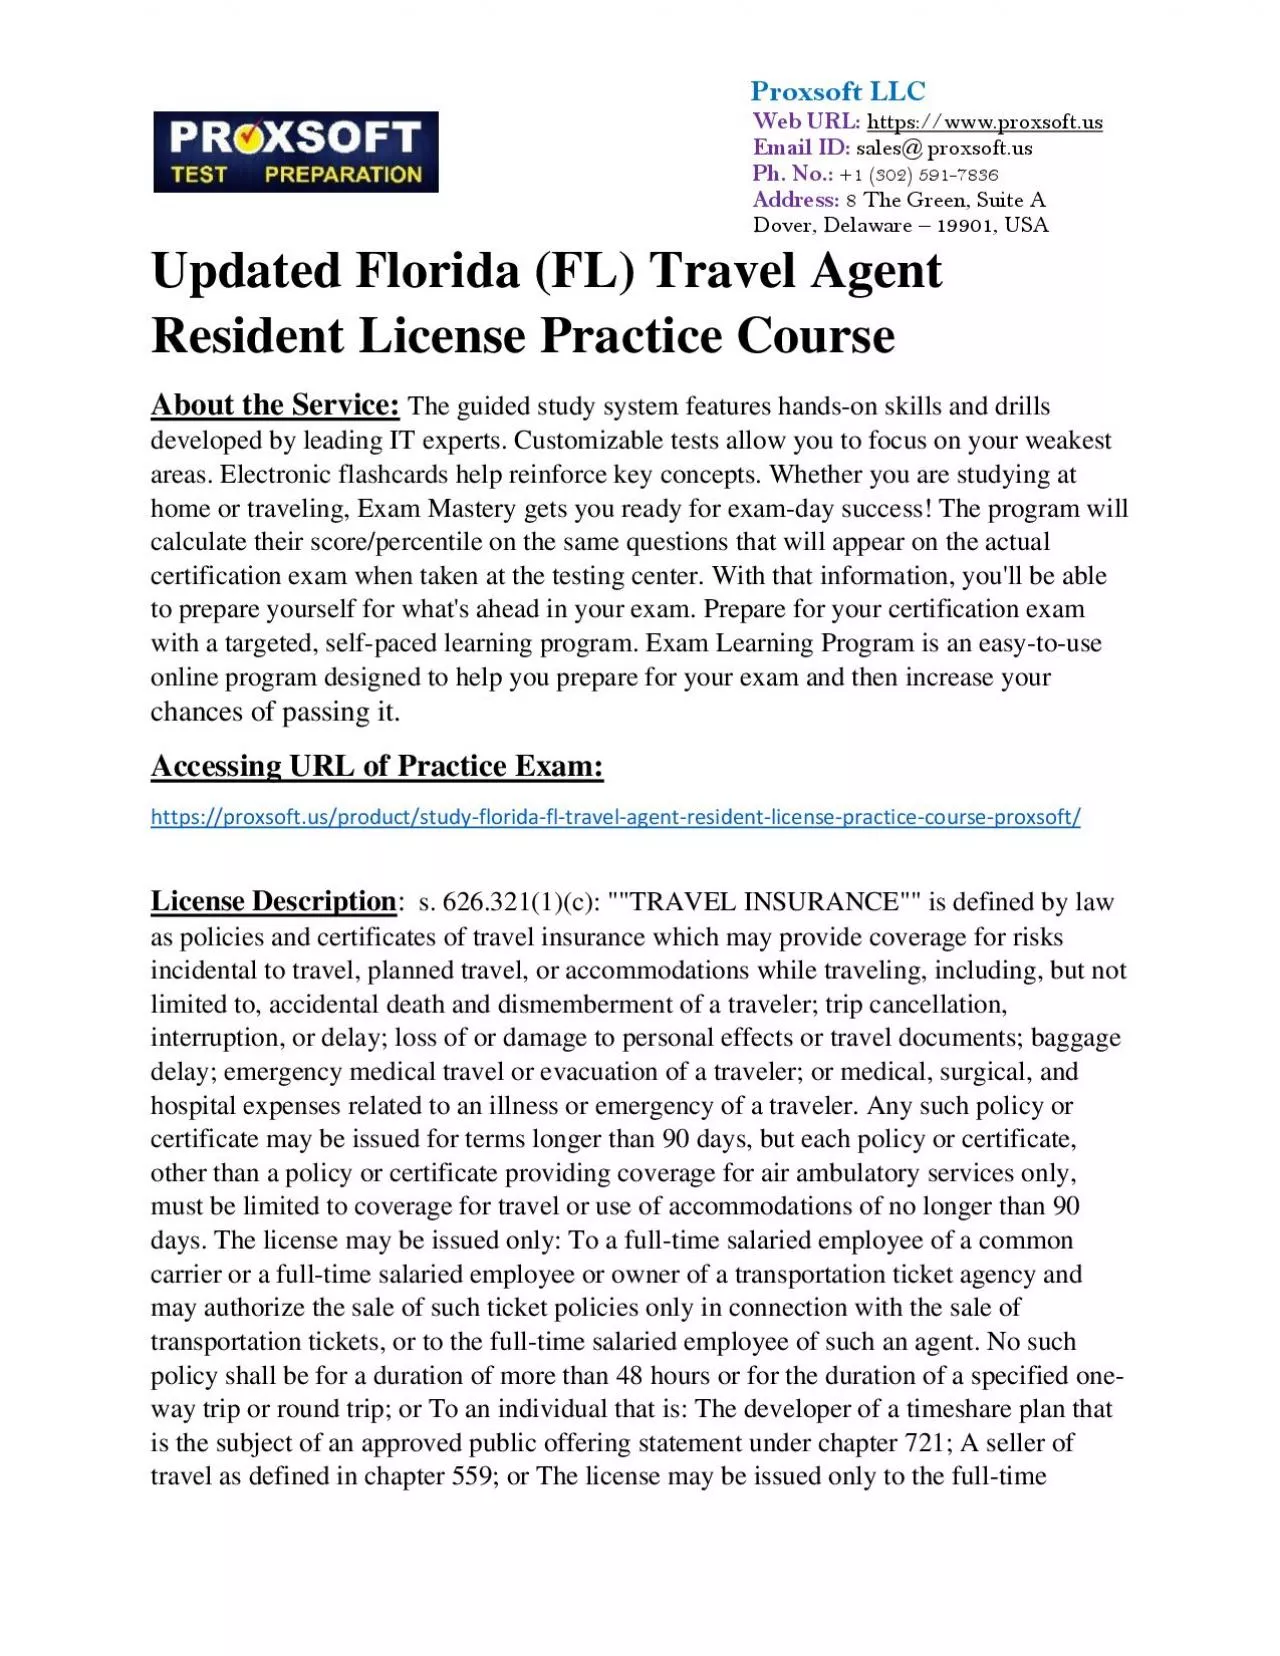 Updated Florida (FL) Travel Agent Resident License Practice Course